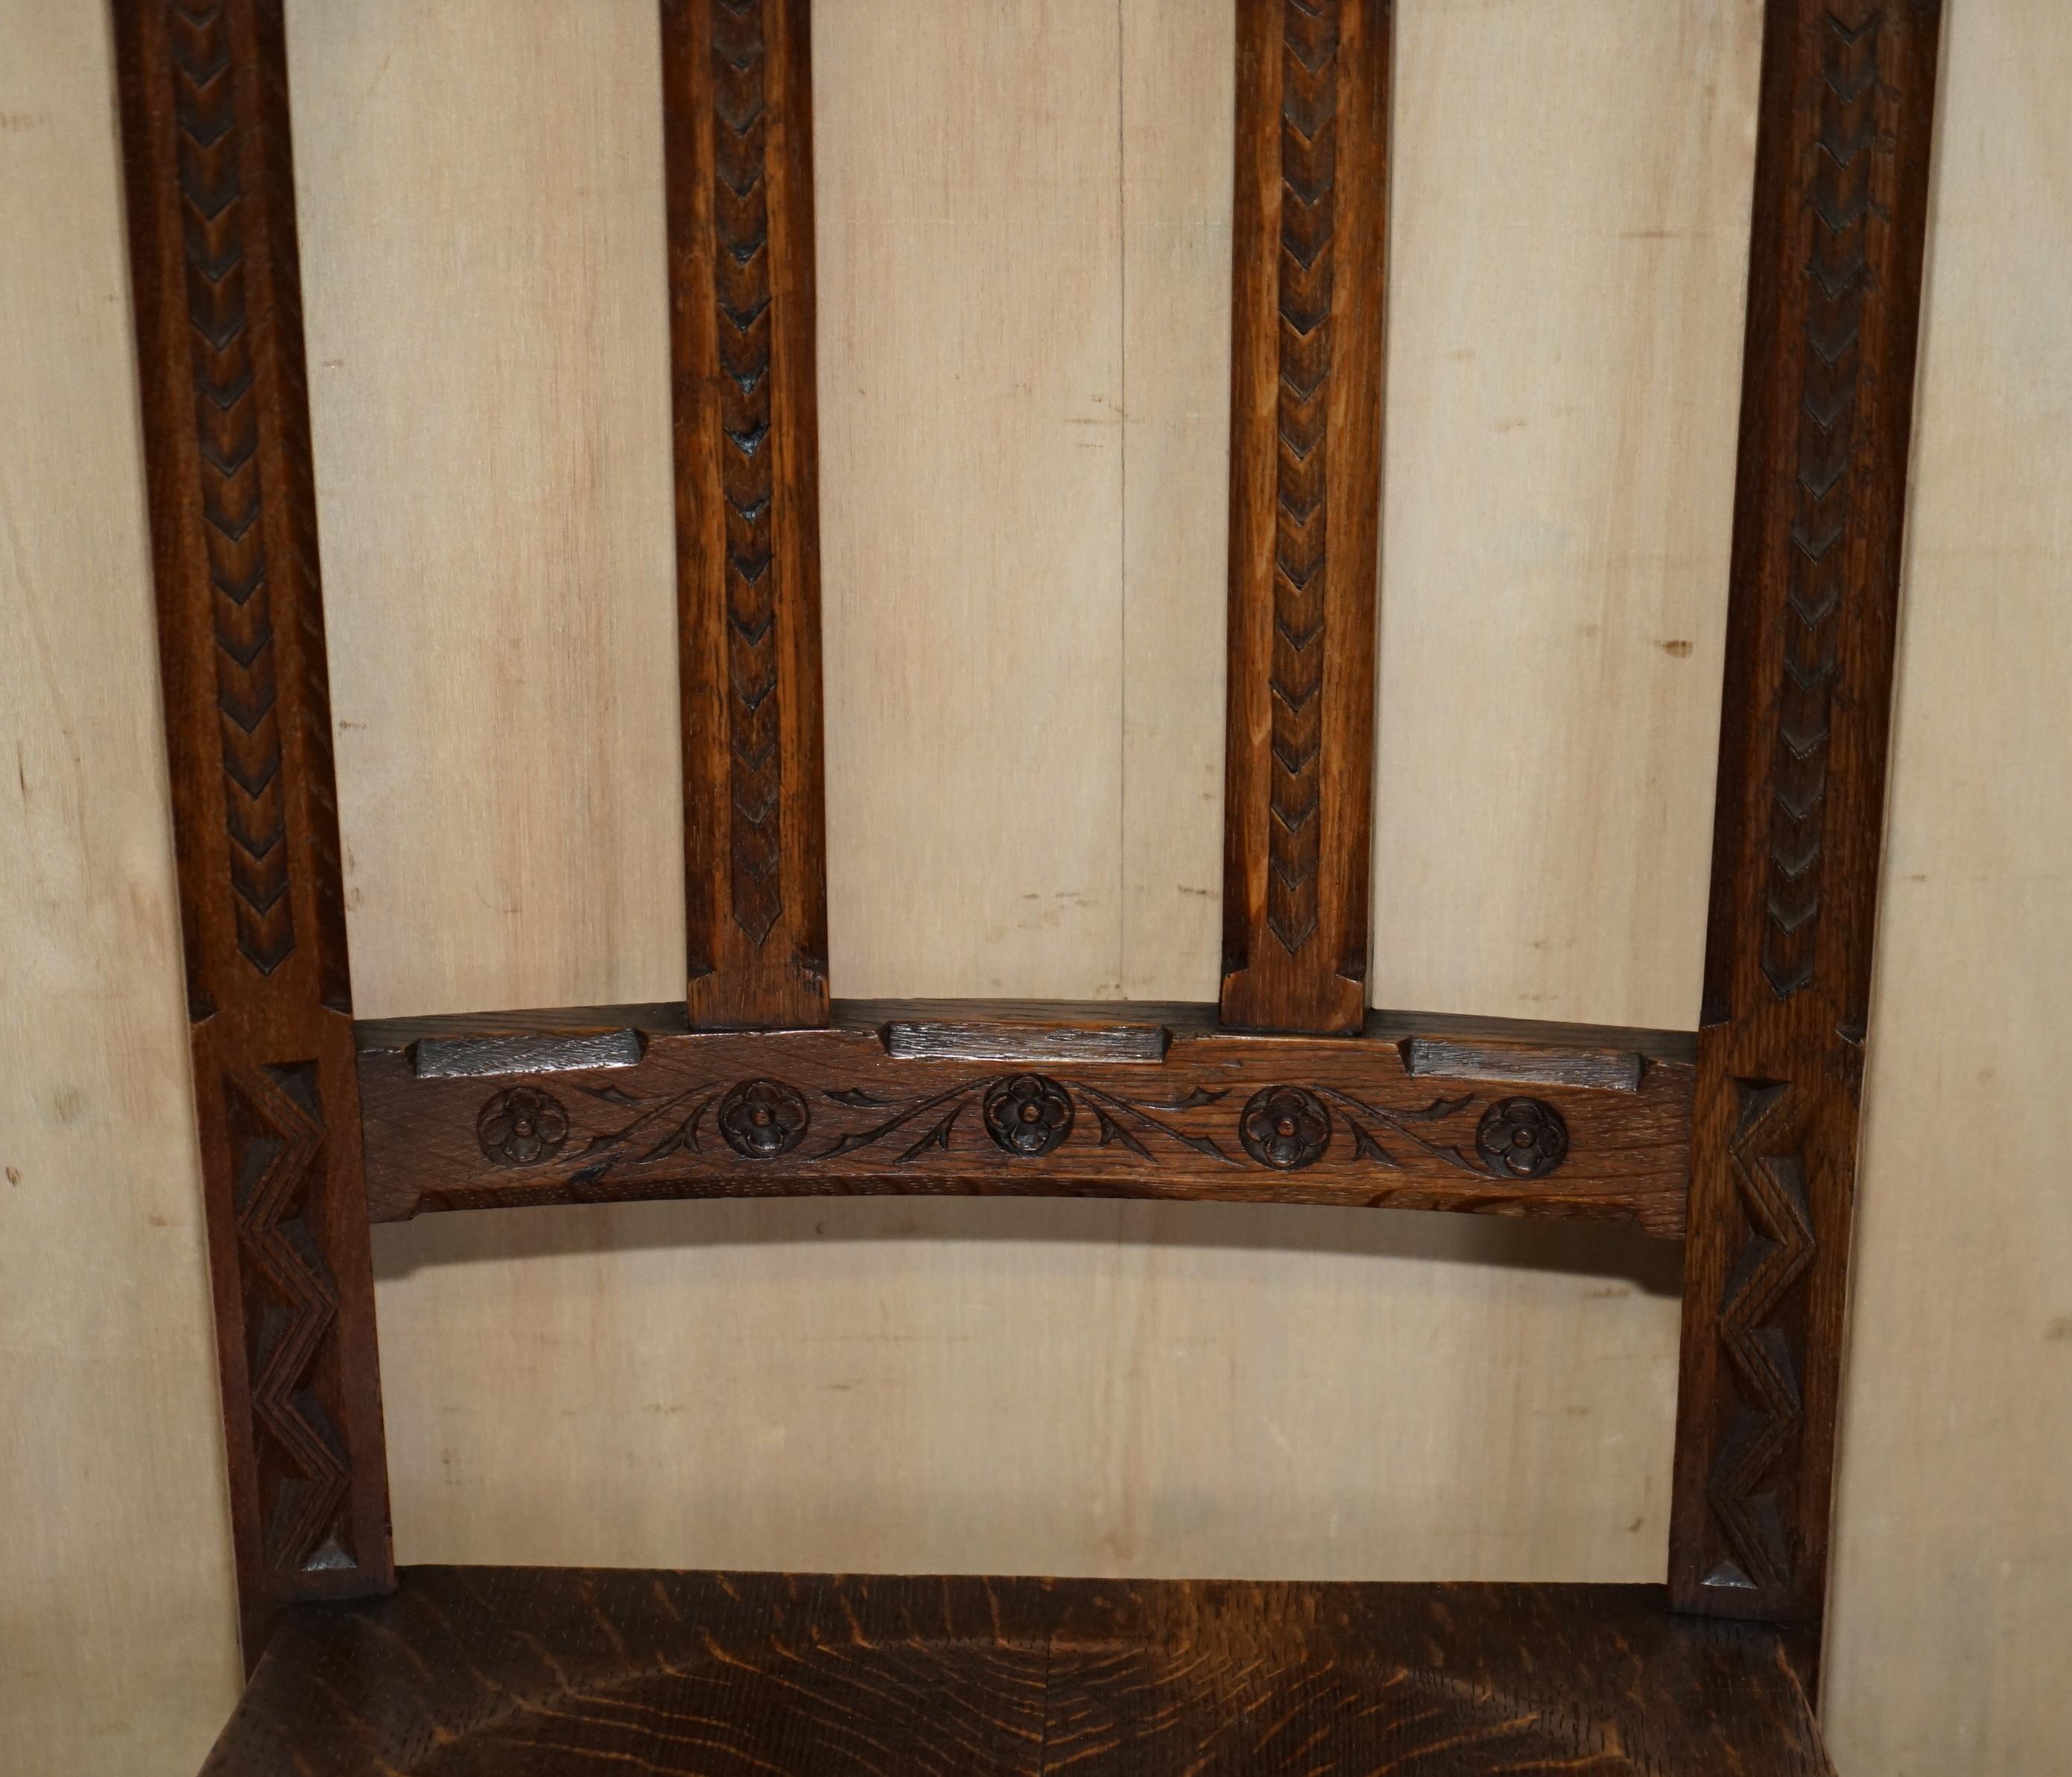 19th Century SIX ANTIQUE ORNATELY CARVED STEEPLE BACK WALNUT GOTHIC REVIVAL DiNING CHAIRS For Sale